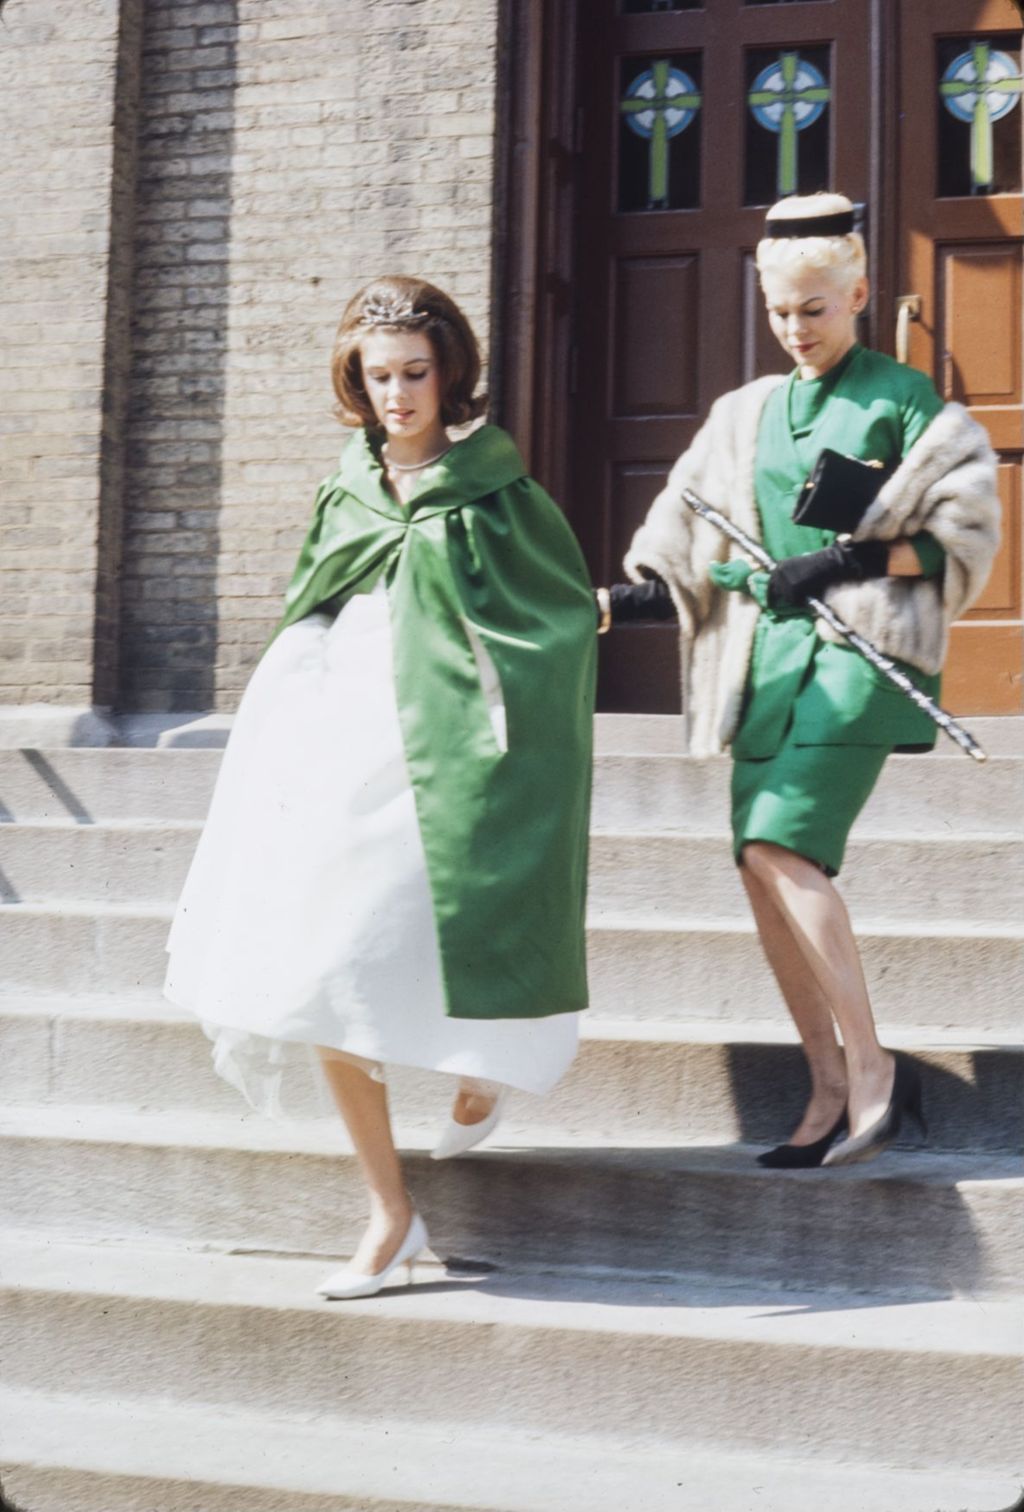 St. Patrick's Day in Chicago, 1966, St. Patrick's Day Queen and attendant outside Old St. Patrick's Church